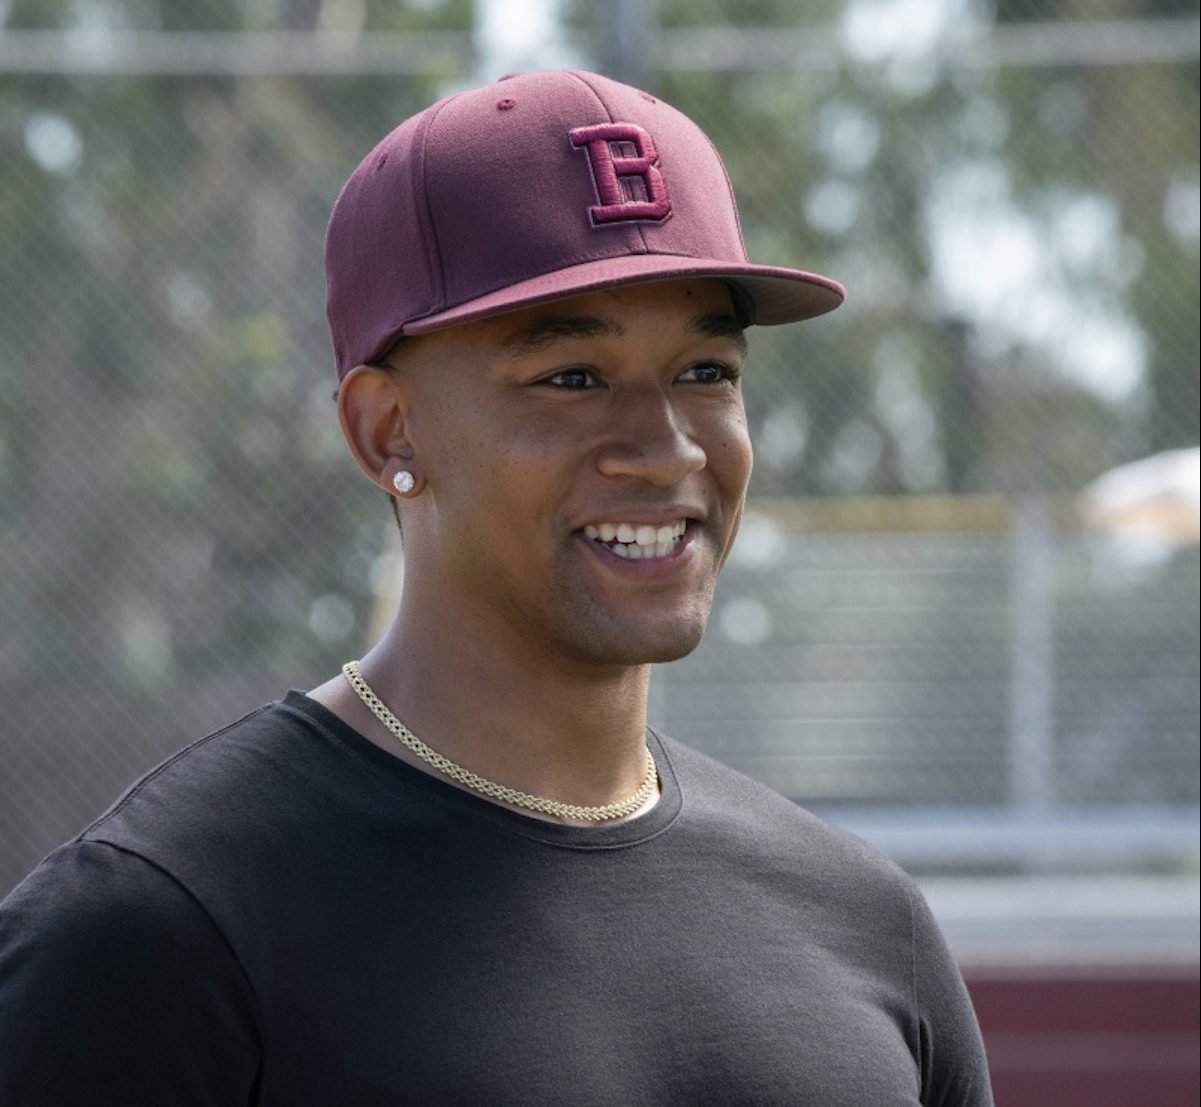 Peyton Alex Smith wearing a burgundy hat and black shirt on a baseball field in the 'All American' spinoff series.